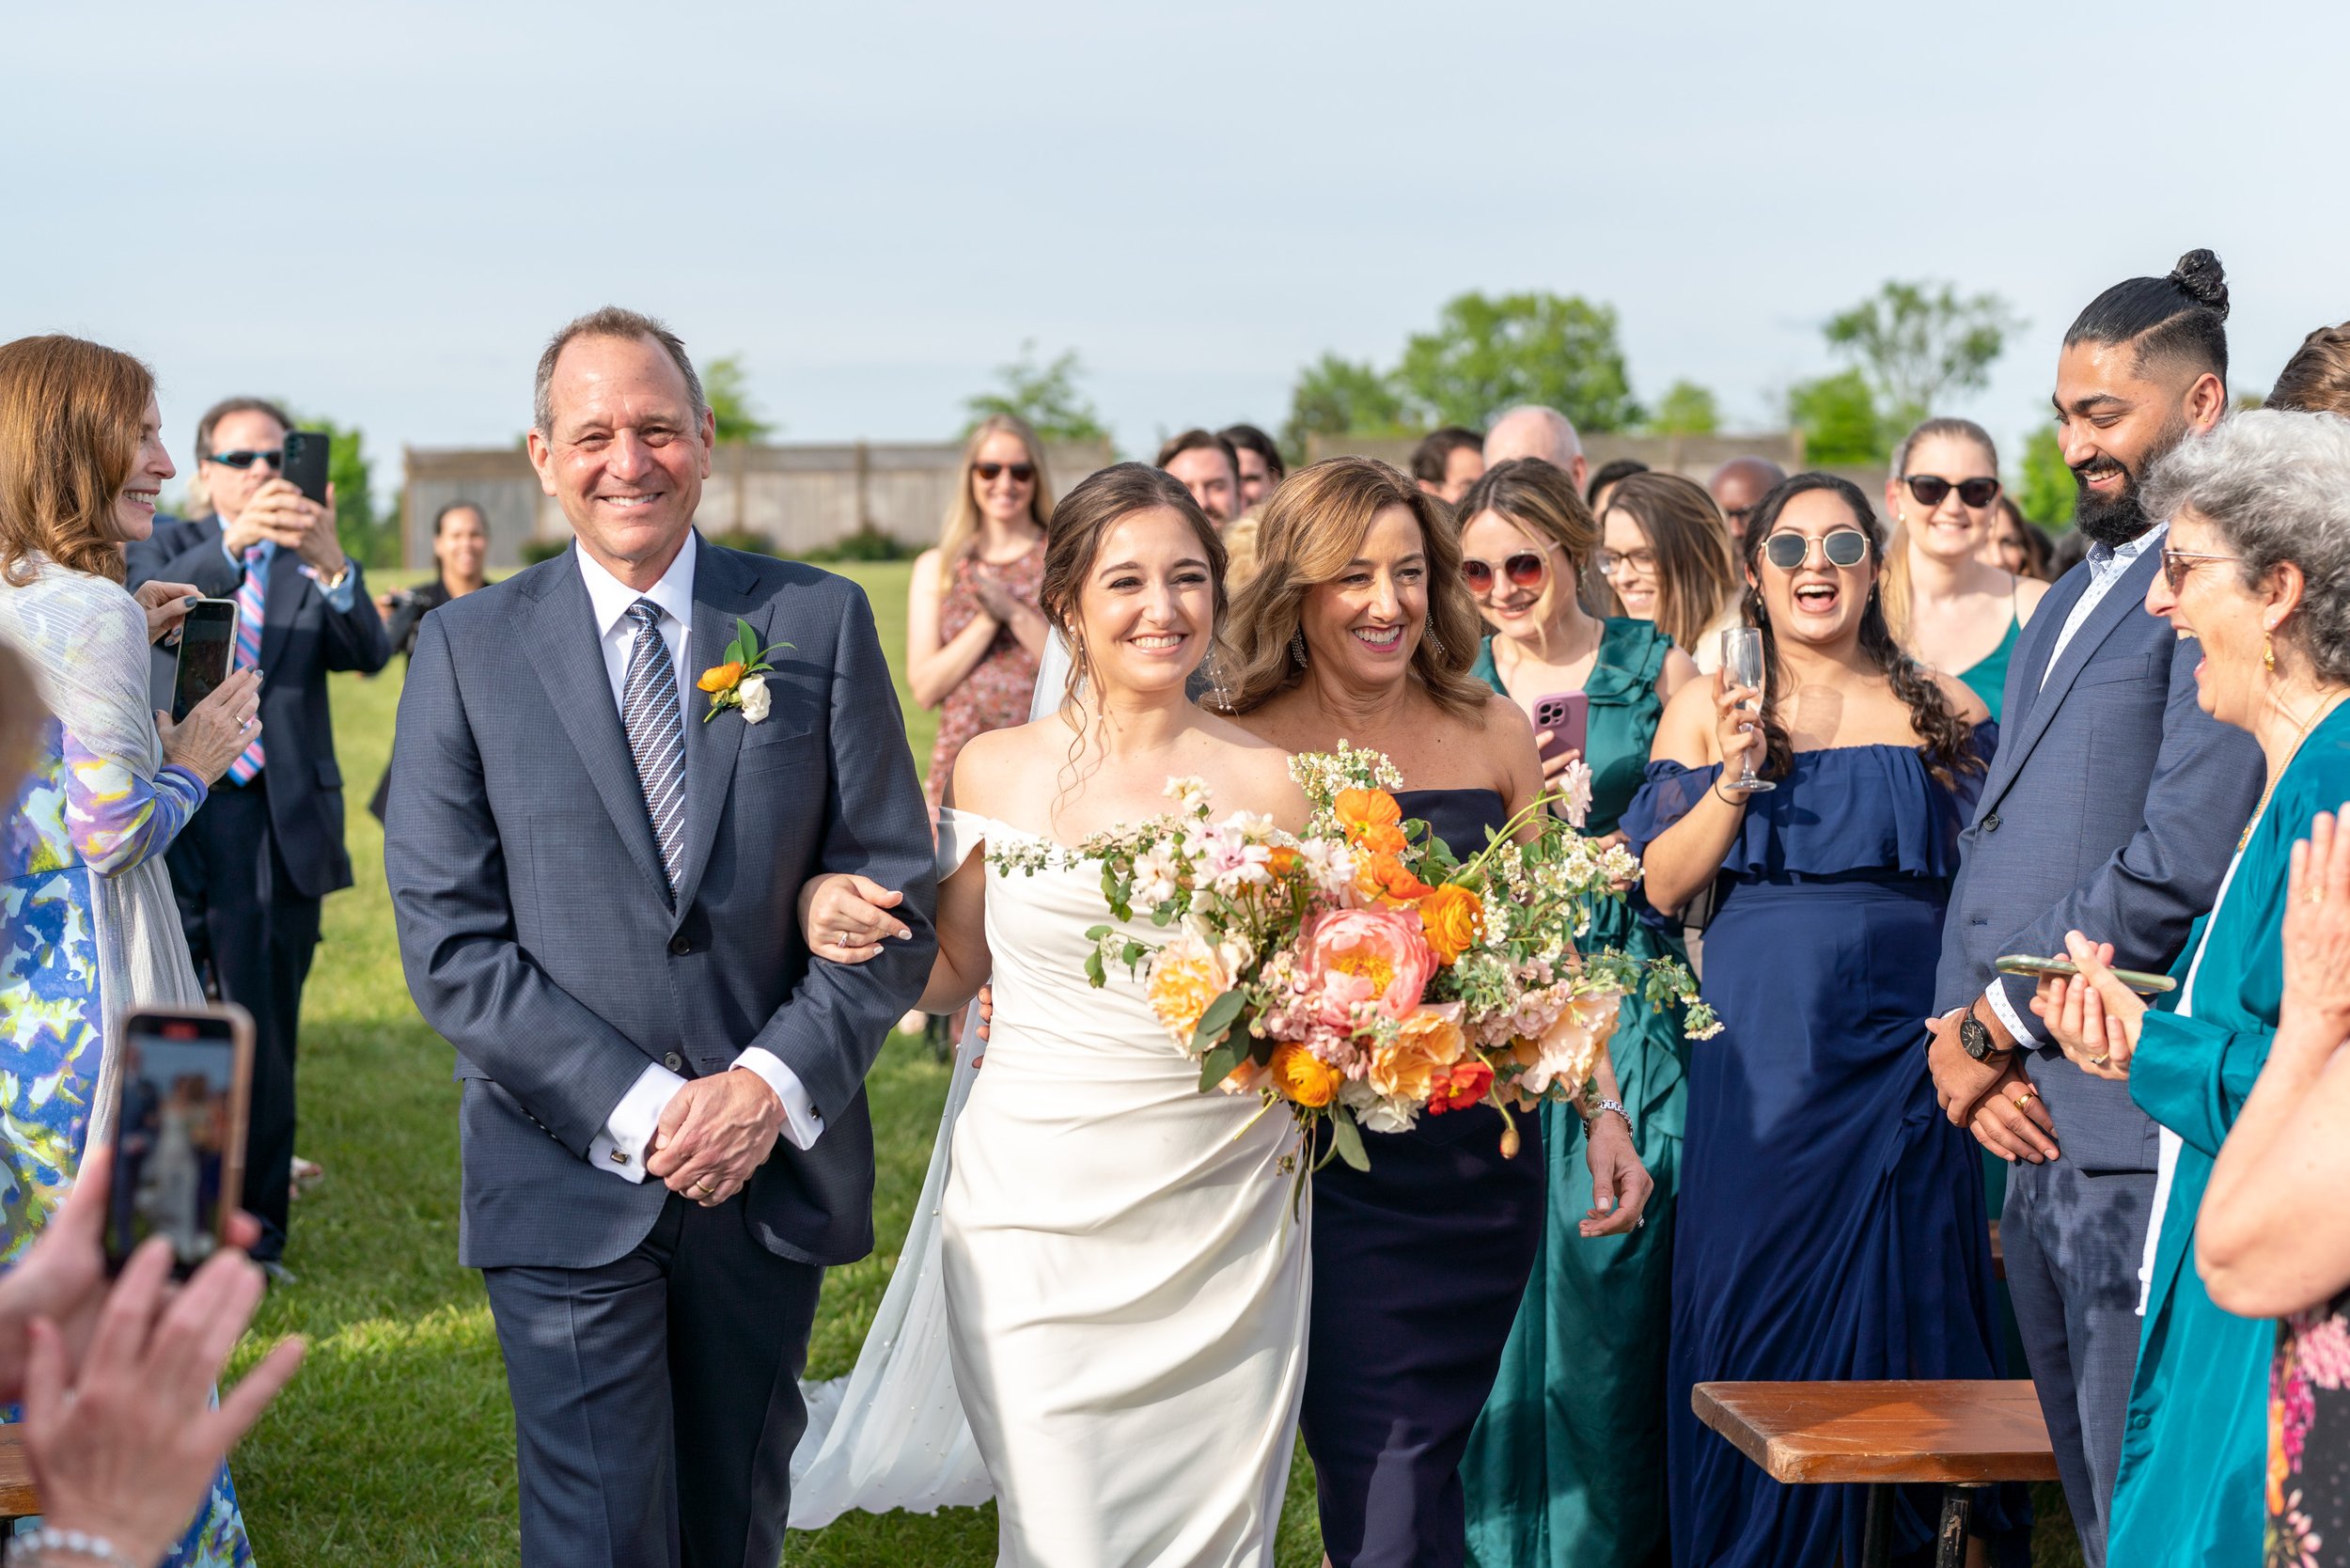 Bride walks with her parents and smiles at the groom under floral arch